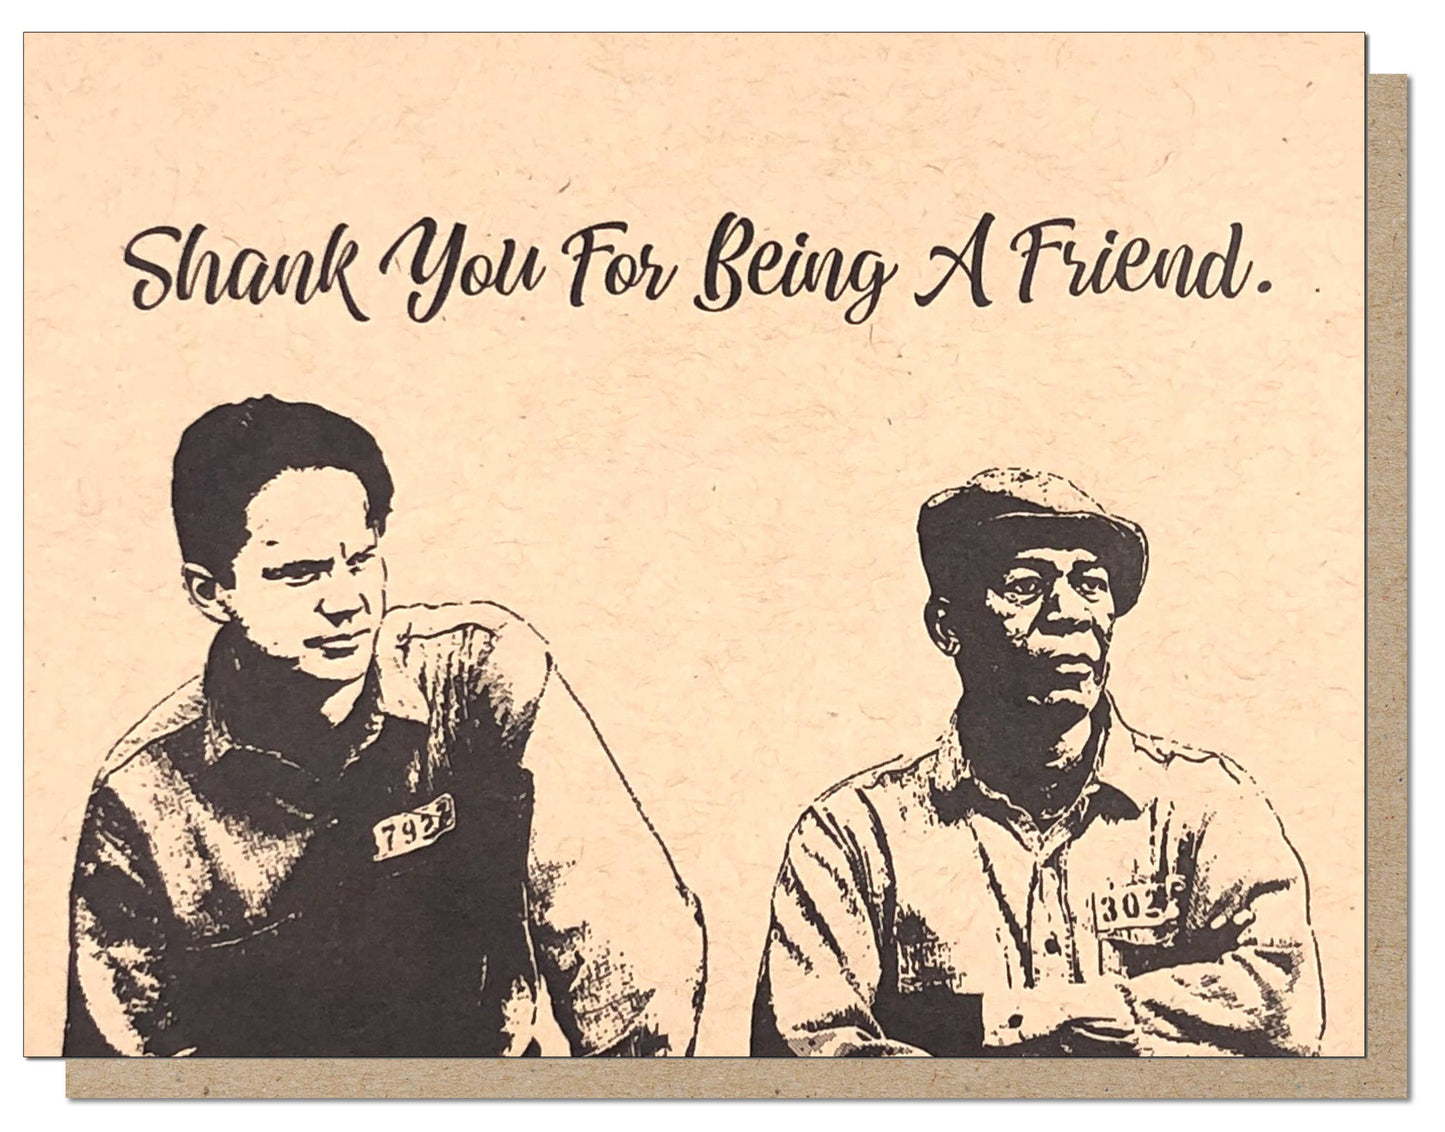 Shank You For Being a Friend Greeting Card